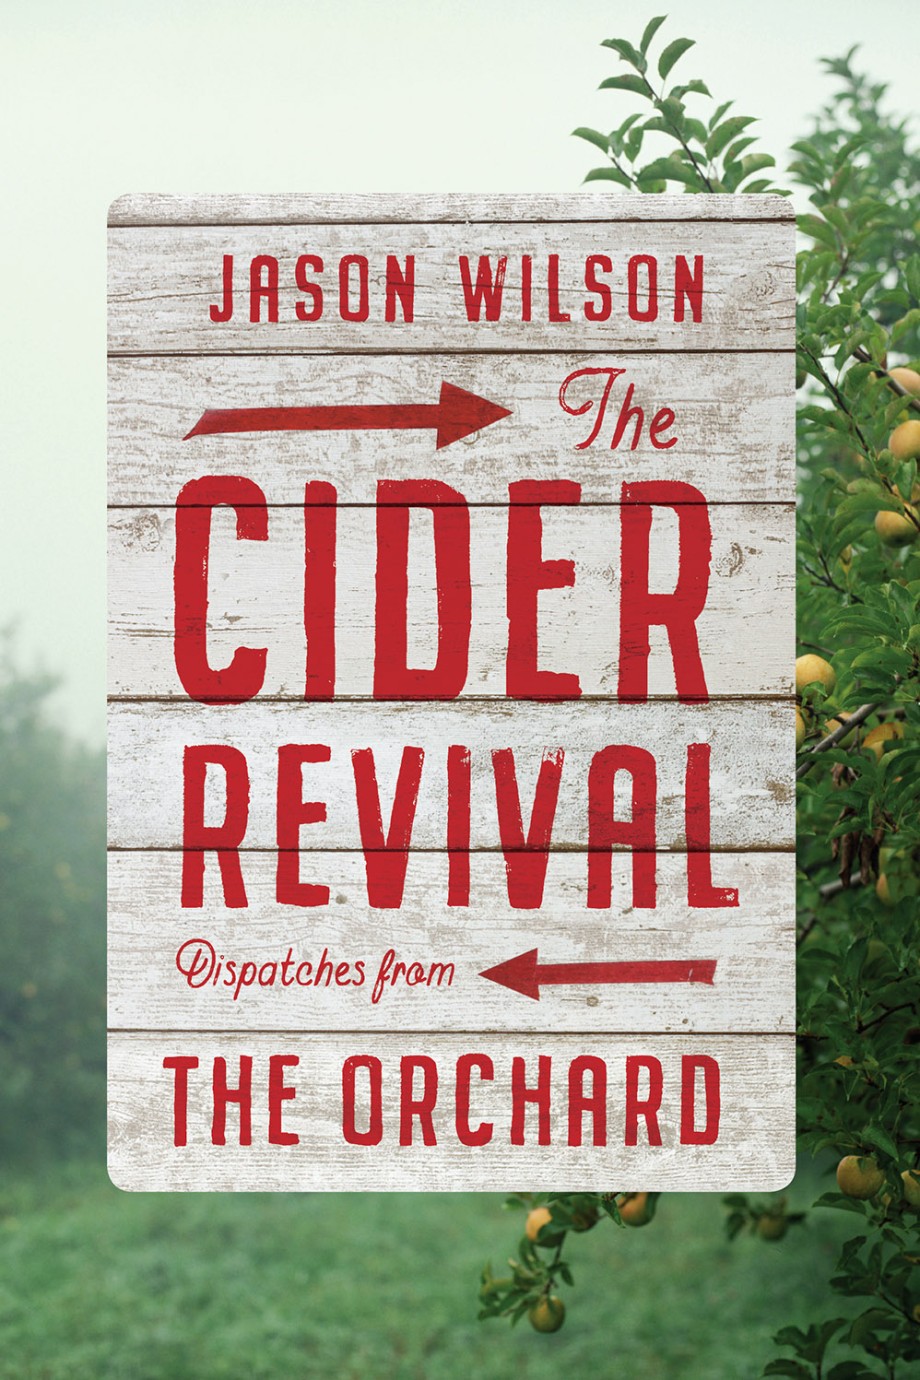 Cider Revival Dispatches from the Orchard